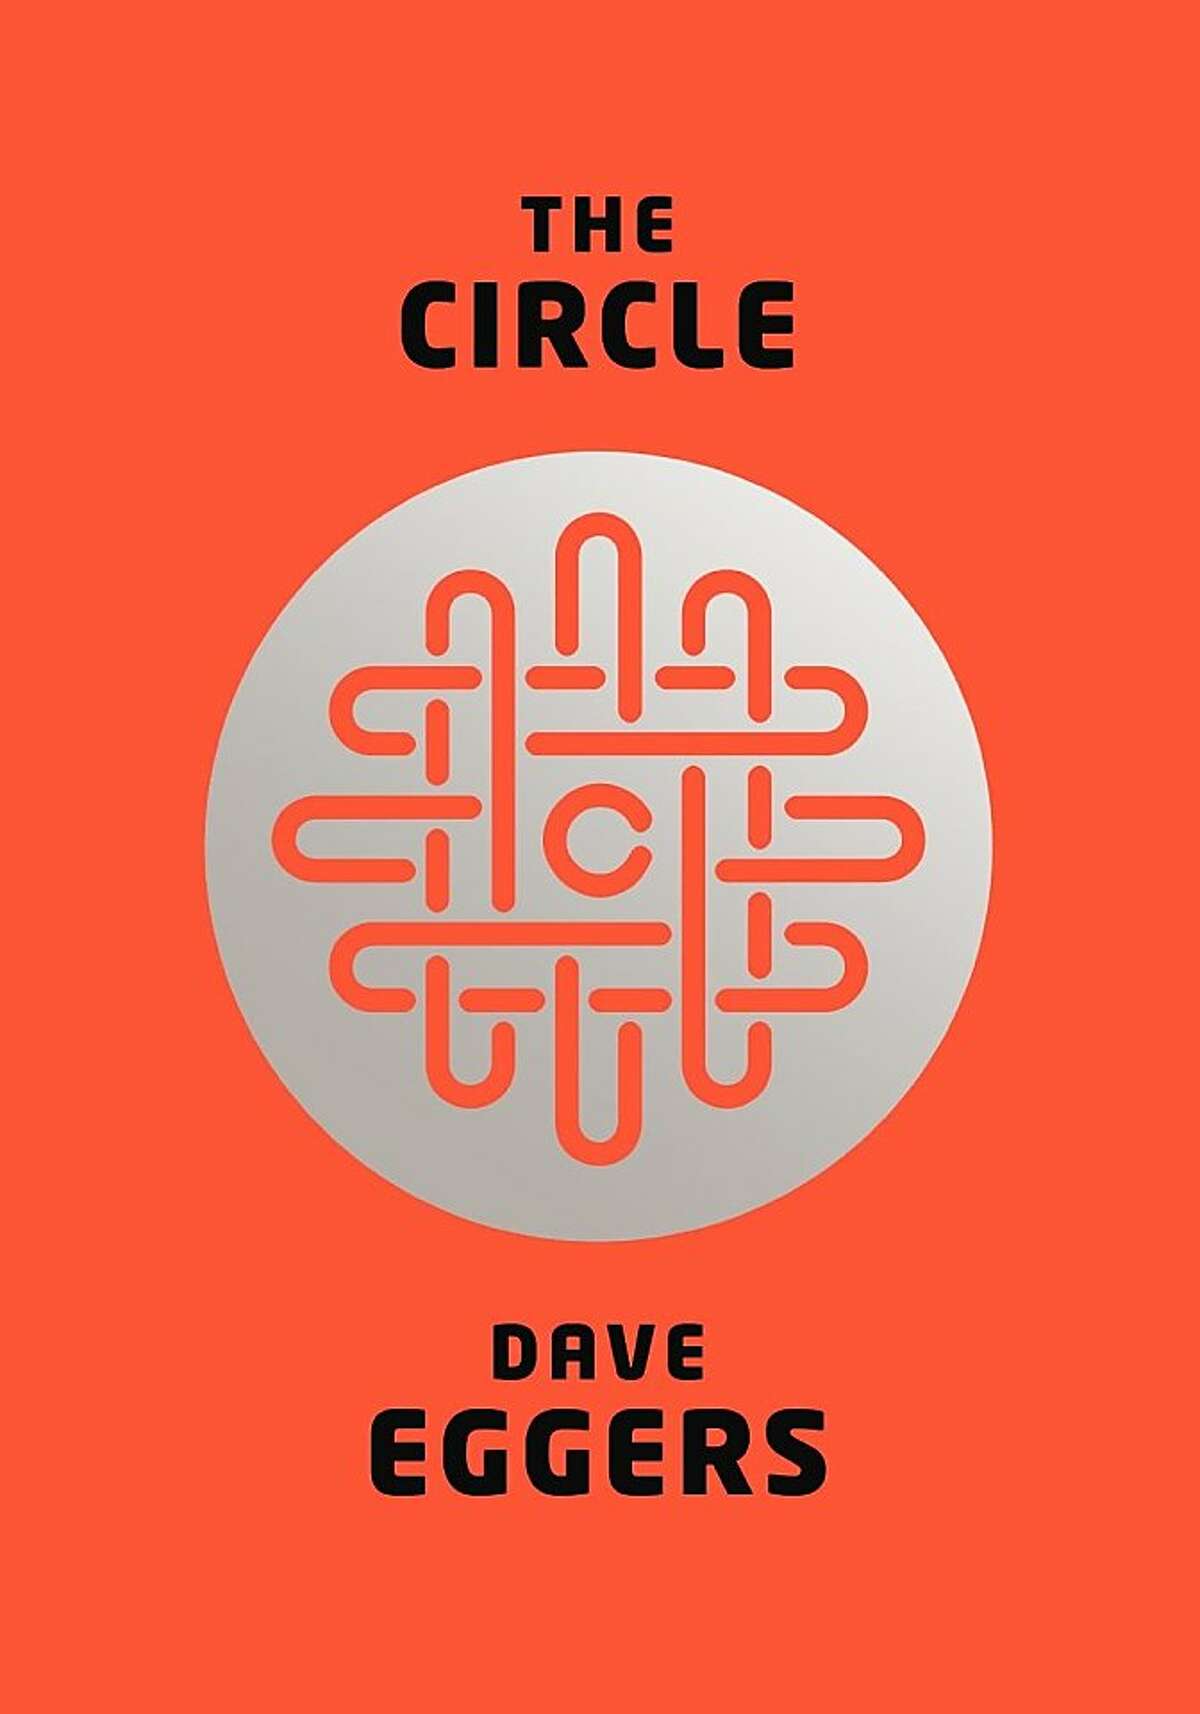 The Circle, by Dave Eggers